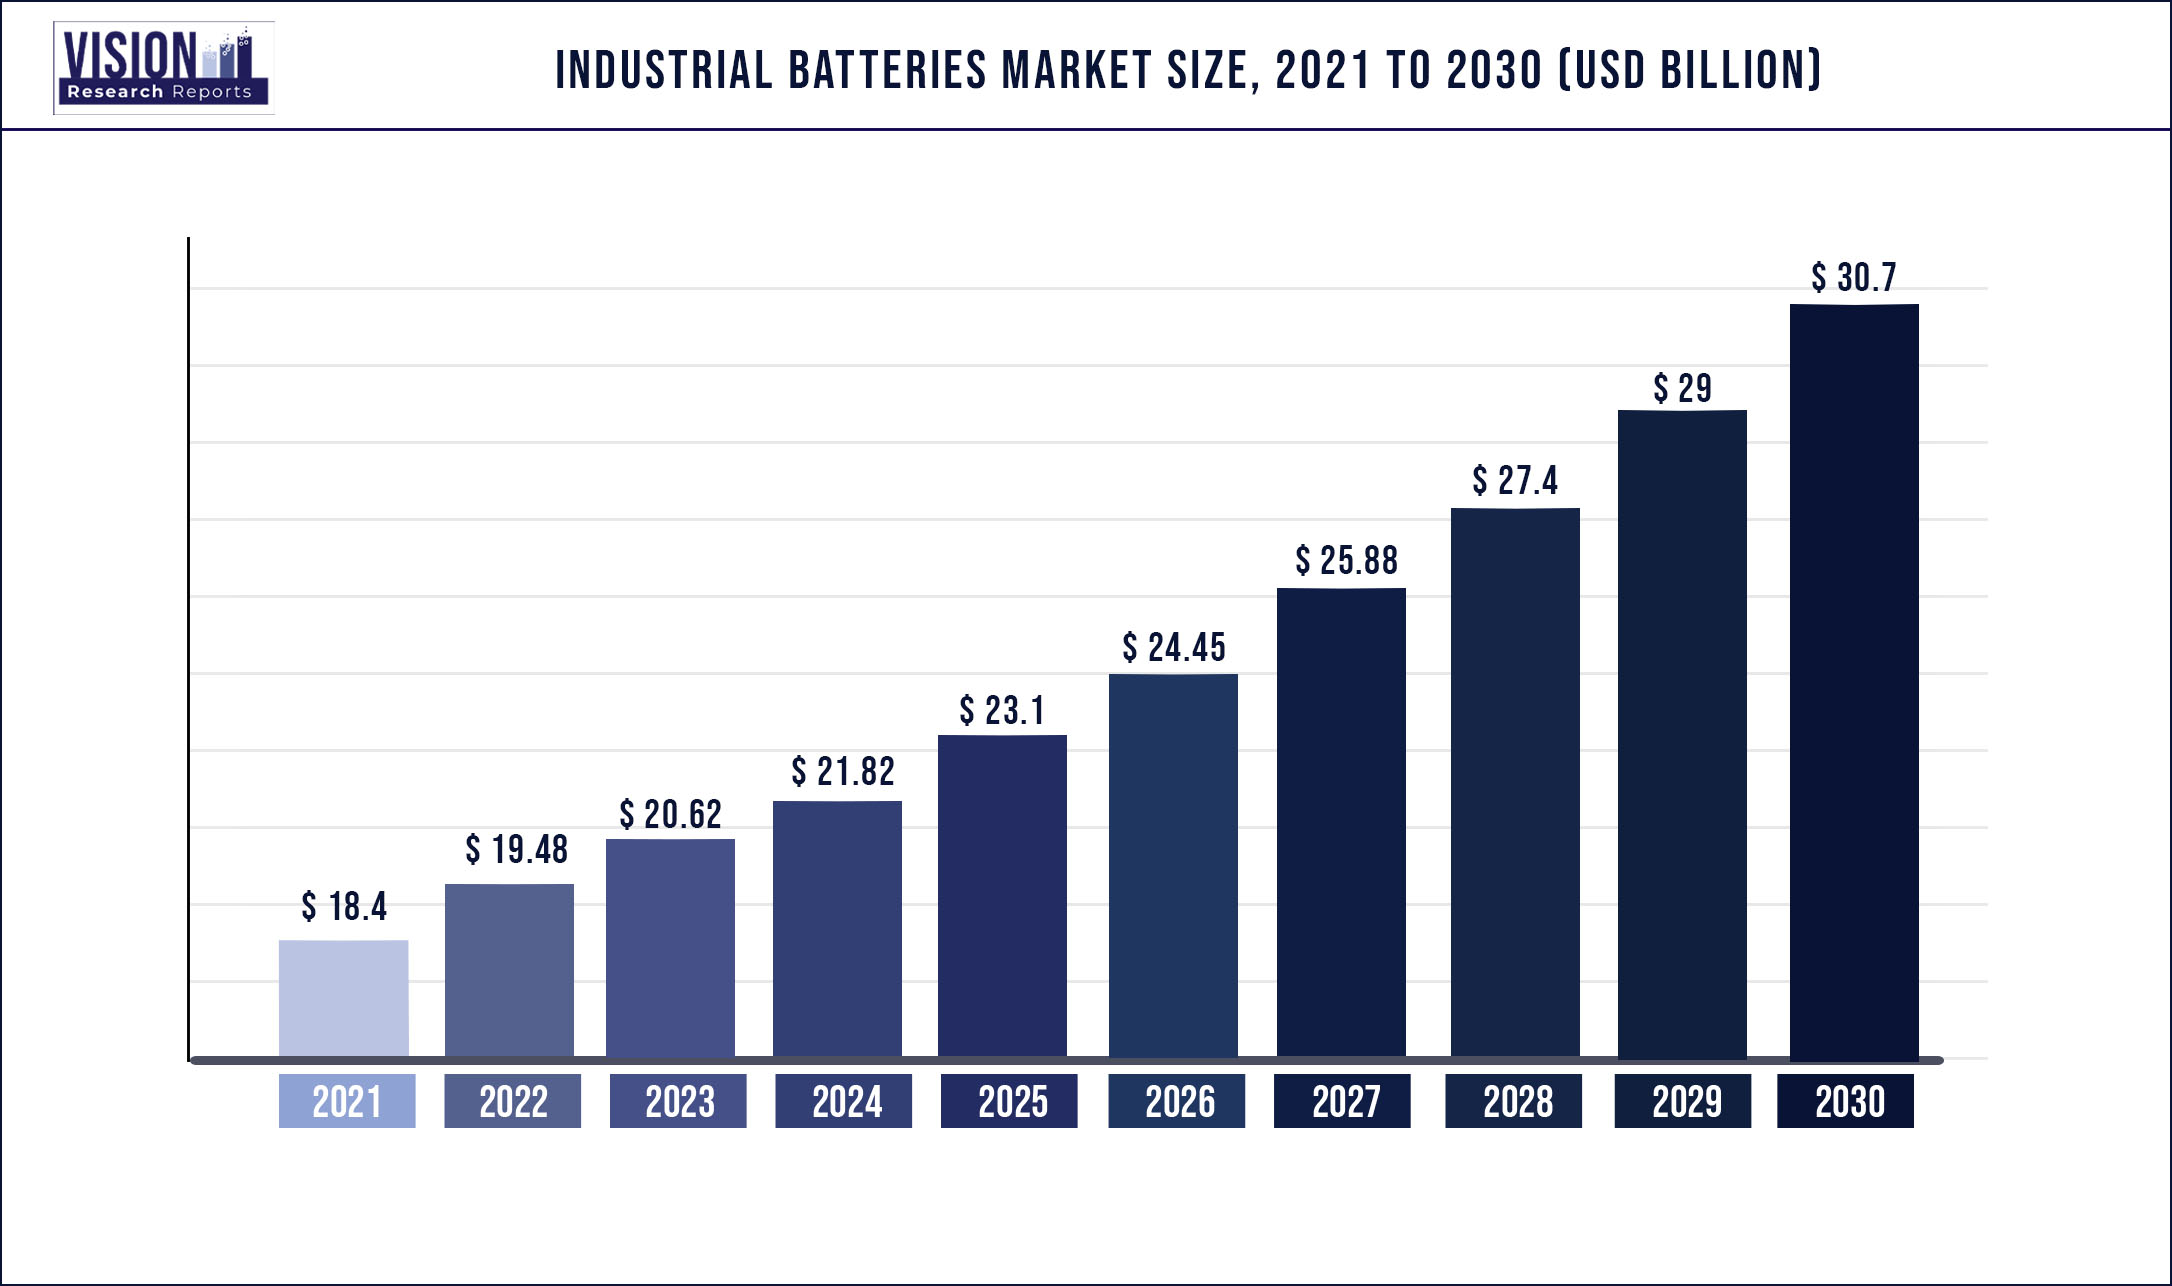 Industrial Batteries Market Size 2021 to 2030